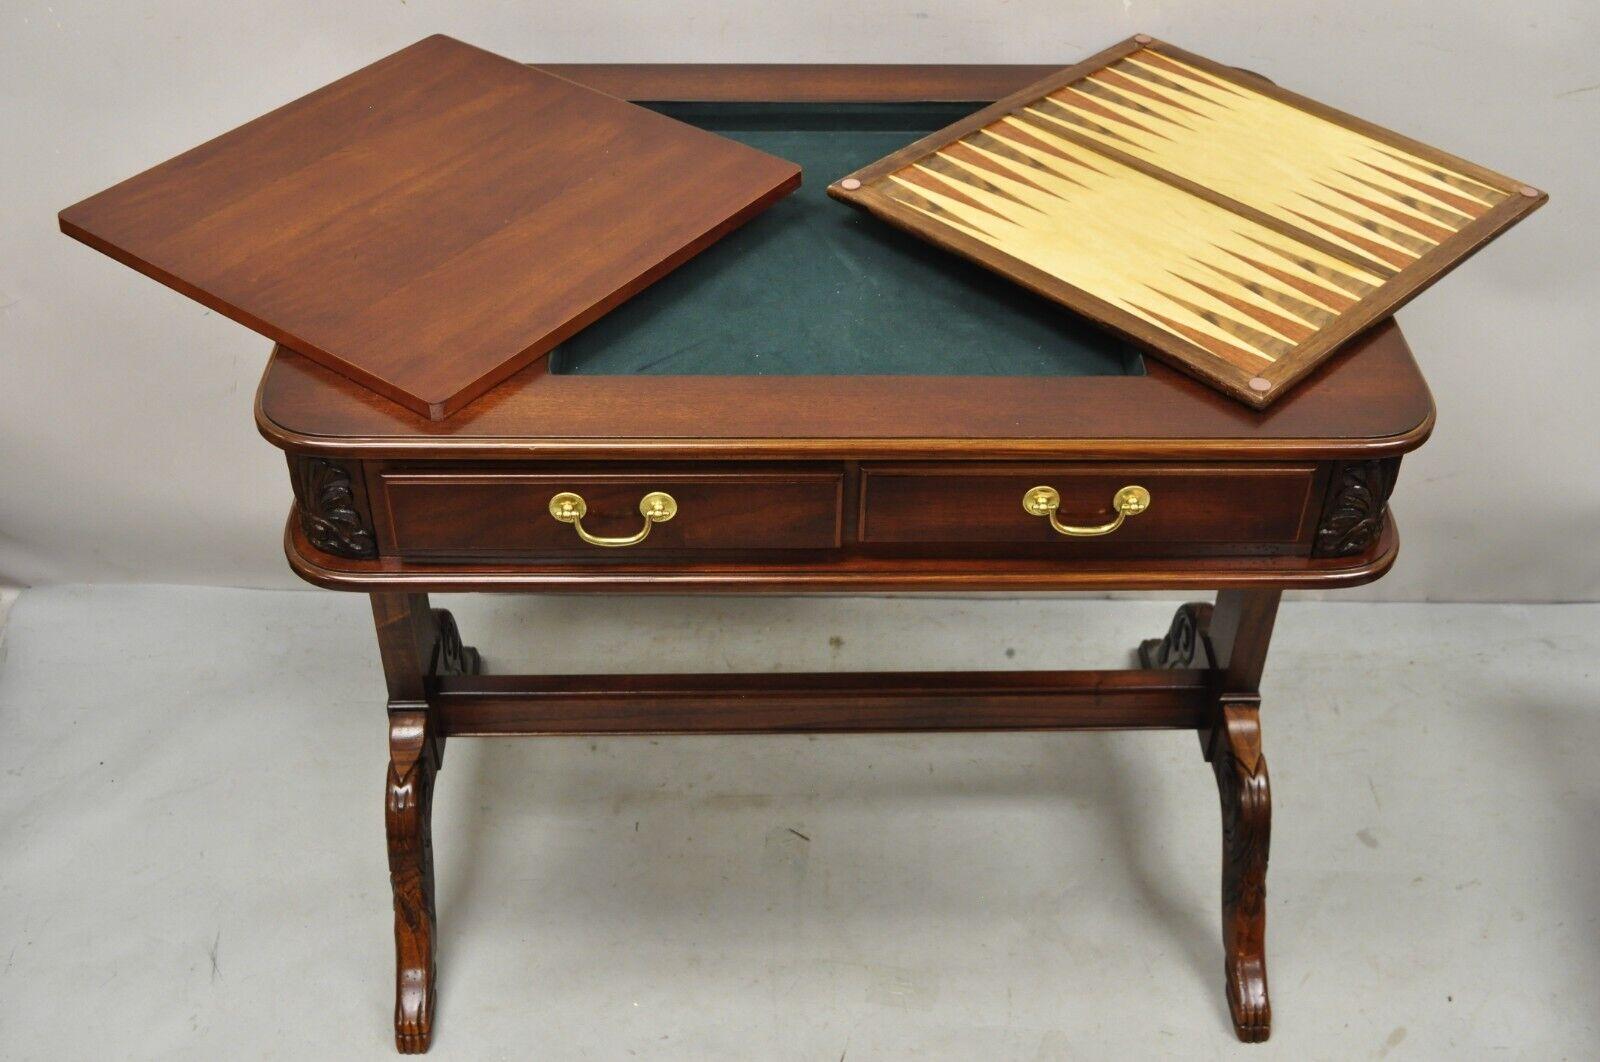 Regency Style Cherry Wood Game Table with Flip Top by Butler Specialty 1